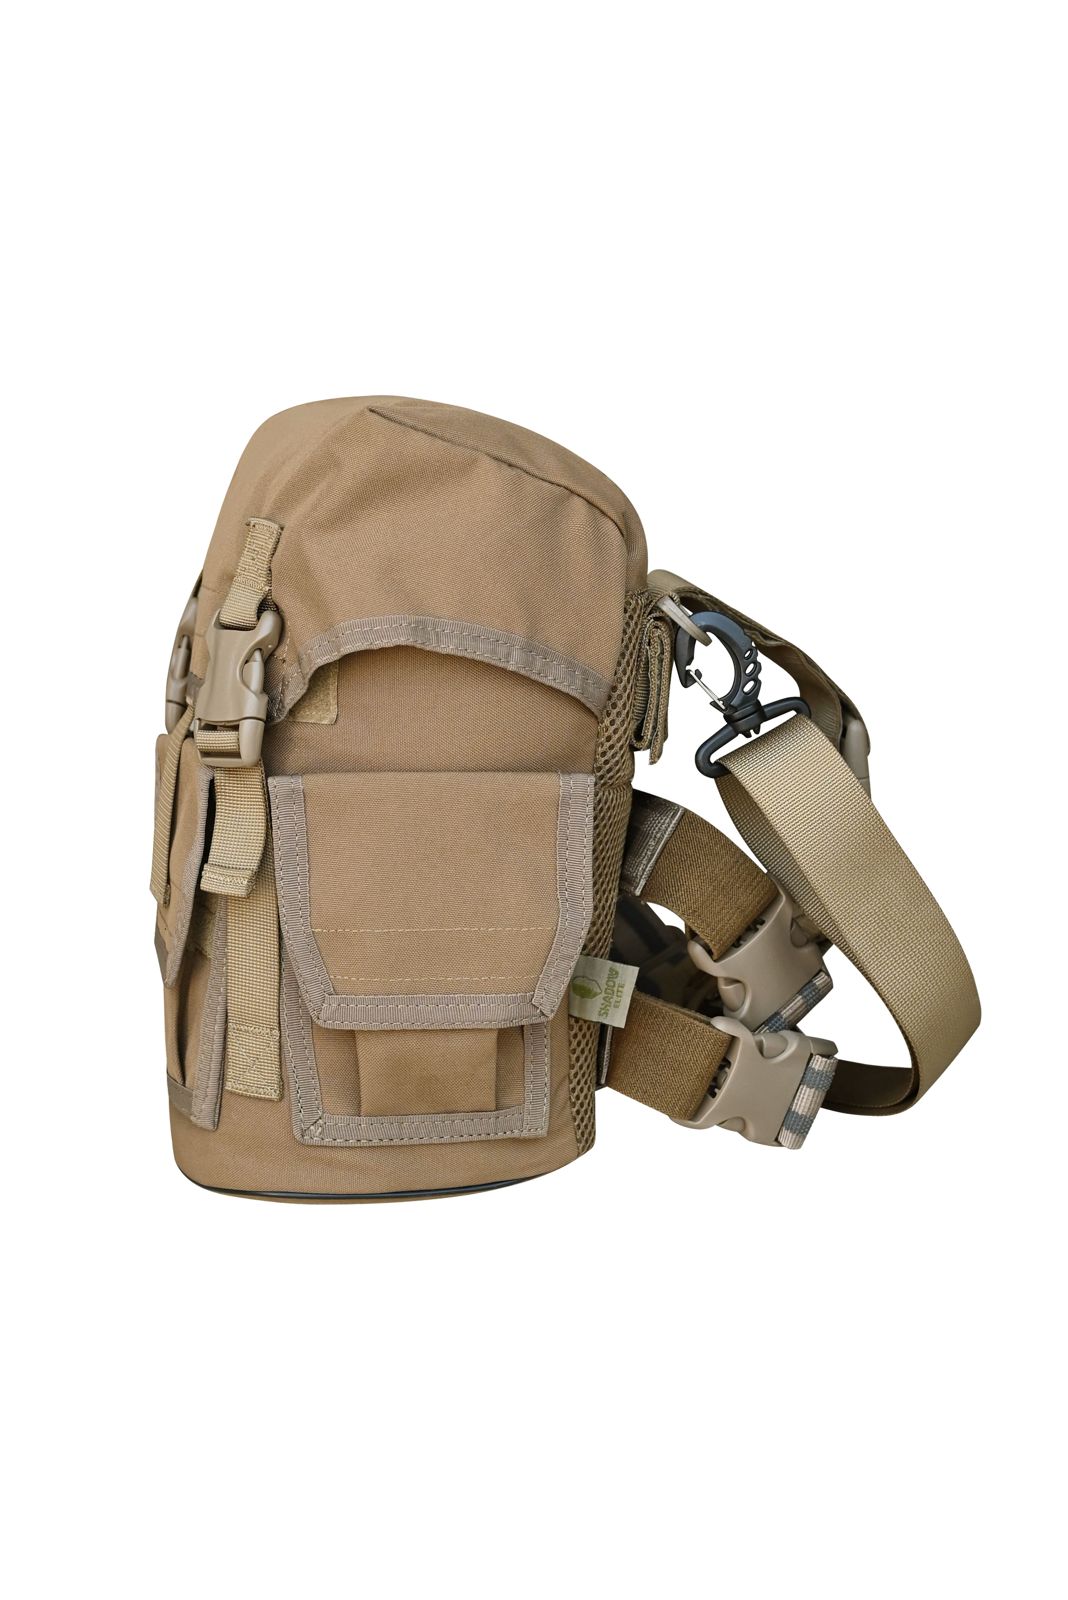 SHE-23051 DROP LEG GAS MASK POUCH COYOTE  SIDE